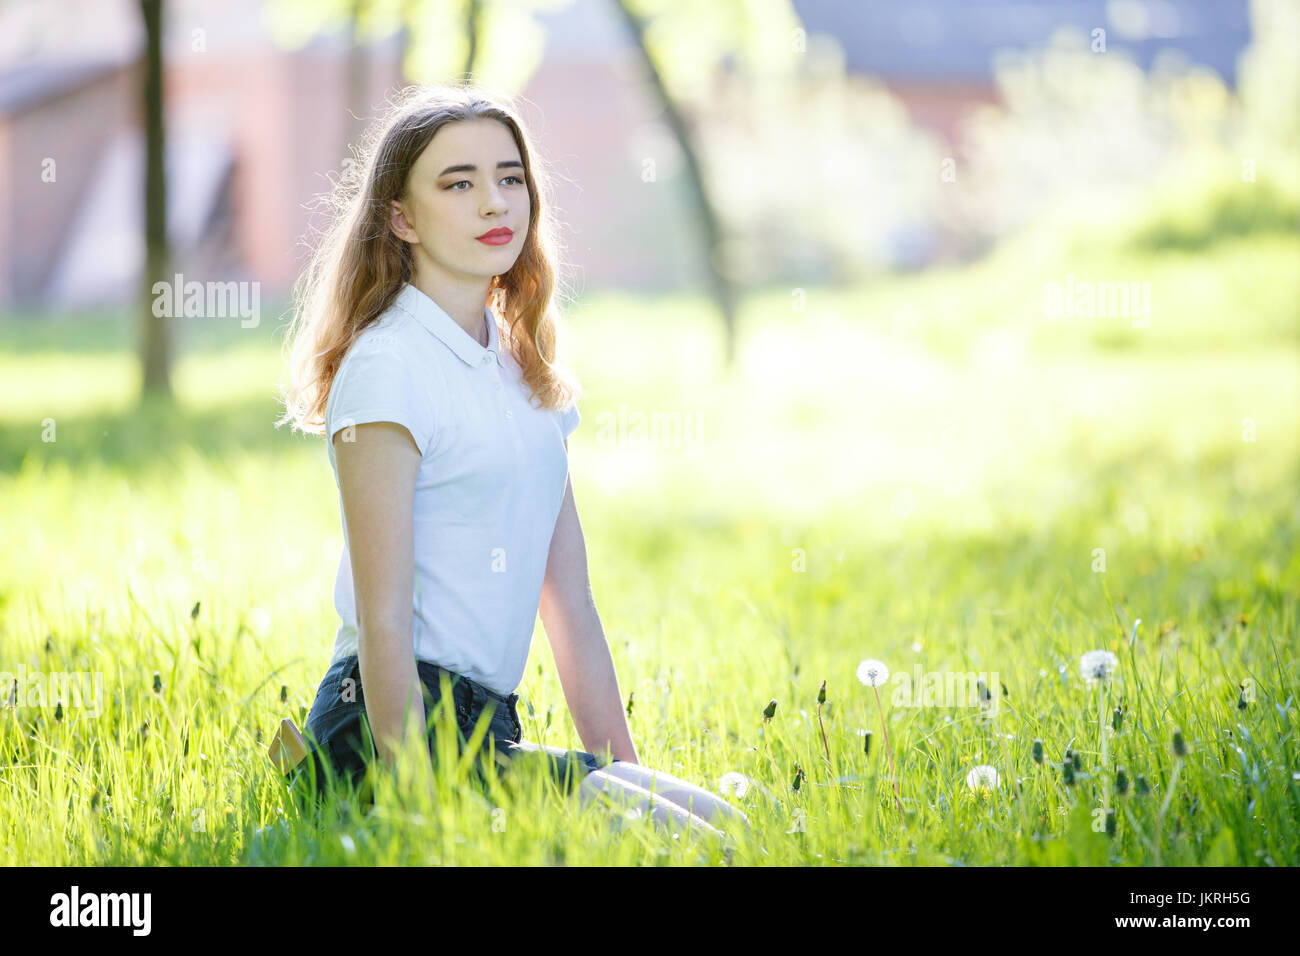 Young teenage girl sitting on green grass in sunny park. Image with copy space aside Stock Photo